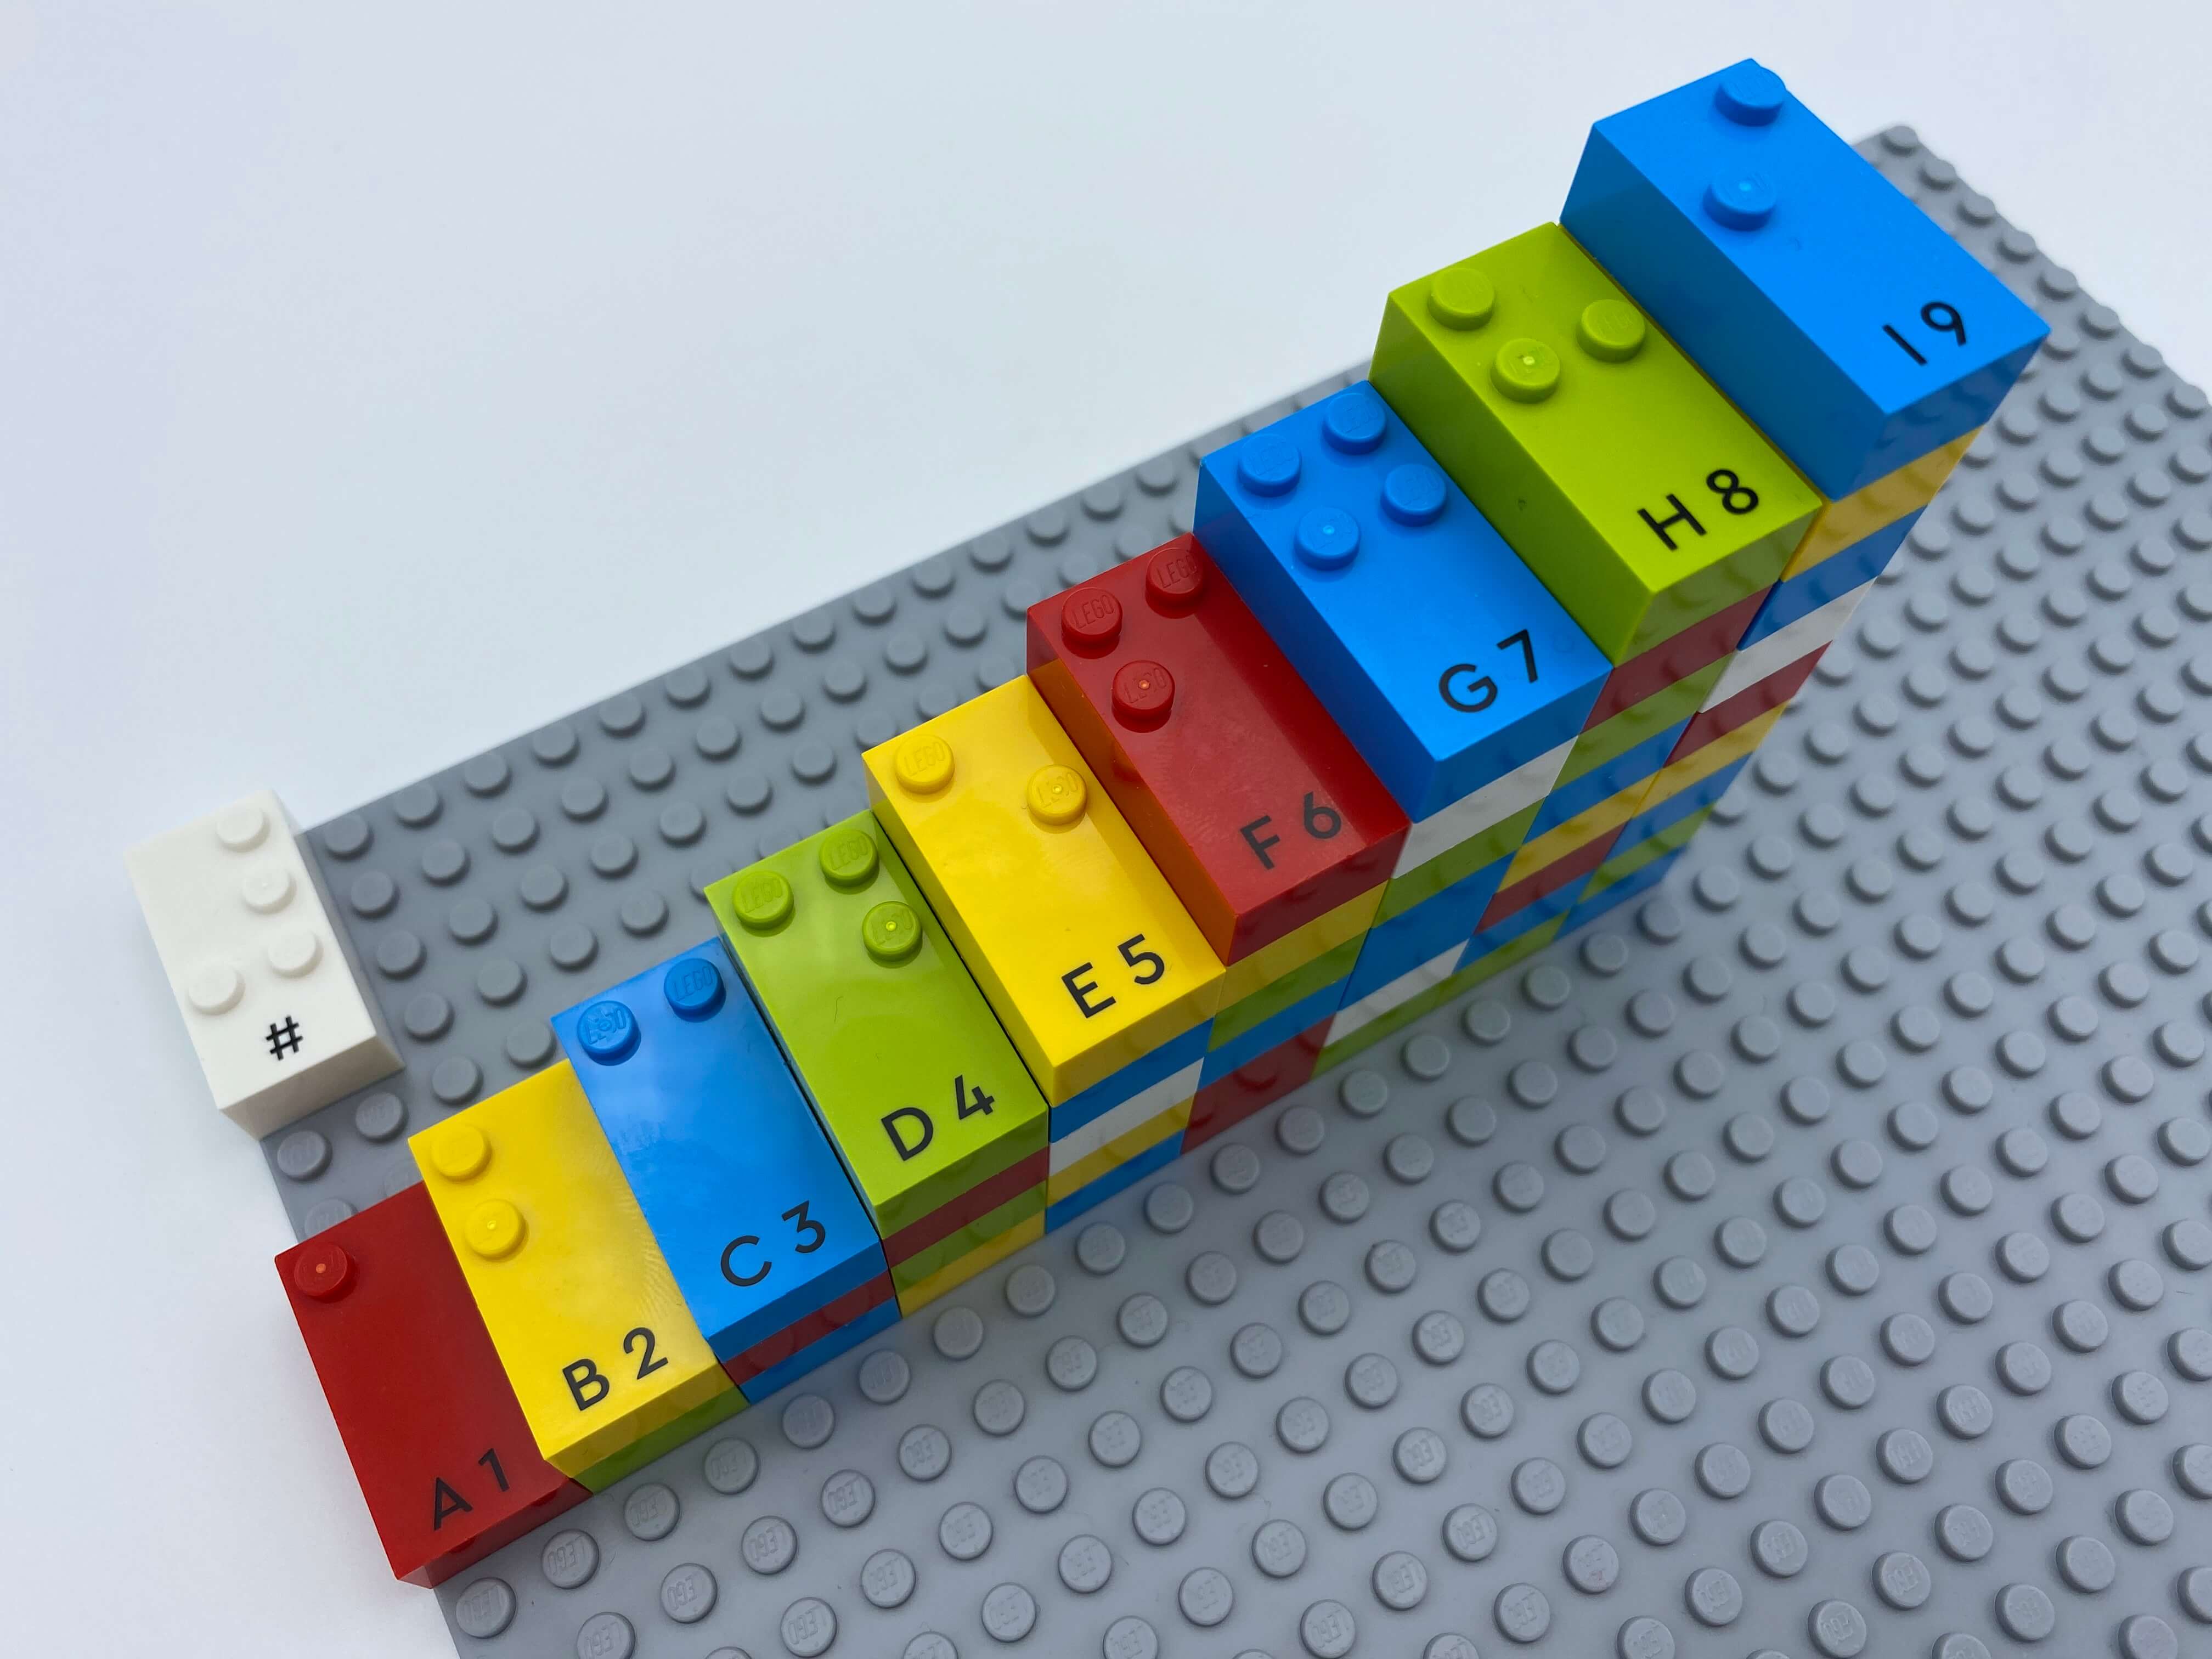 Number sign brick, a stair case. On top of each step we can read 1, 2, 3, 4, 5, 6, 7, 8, 9.